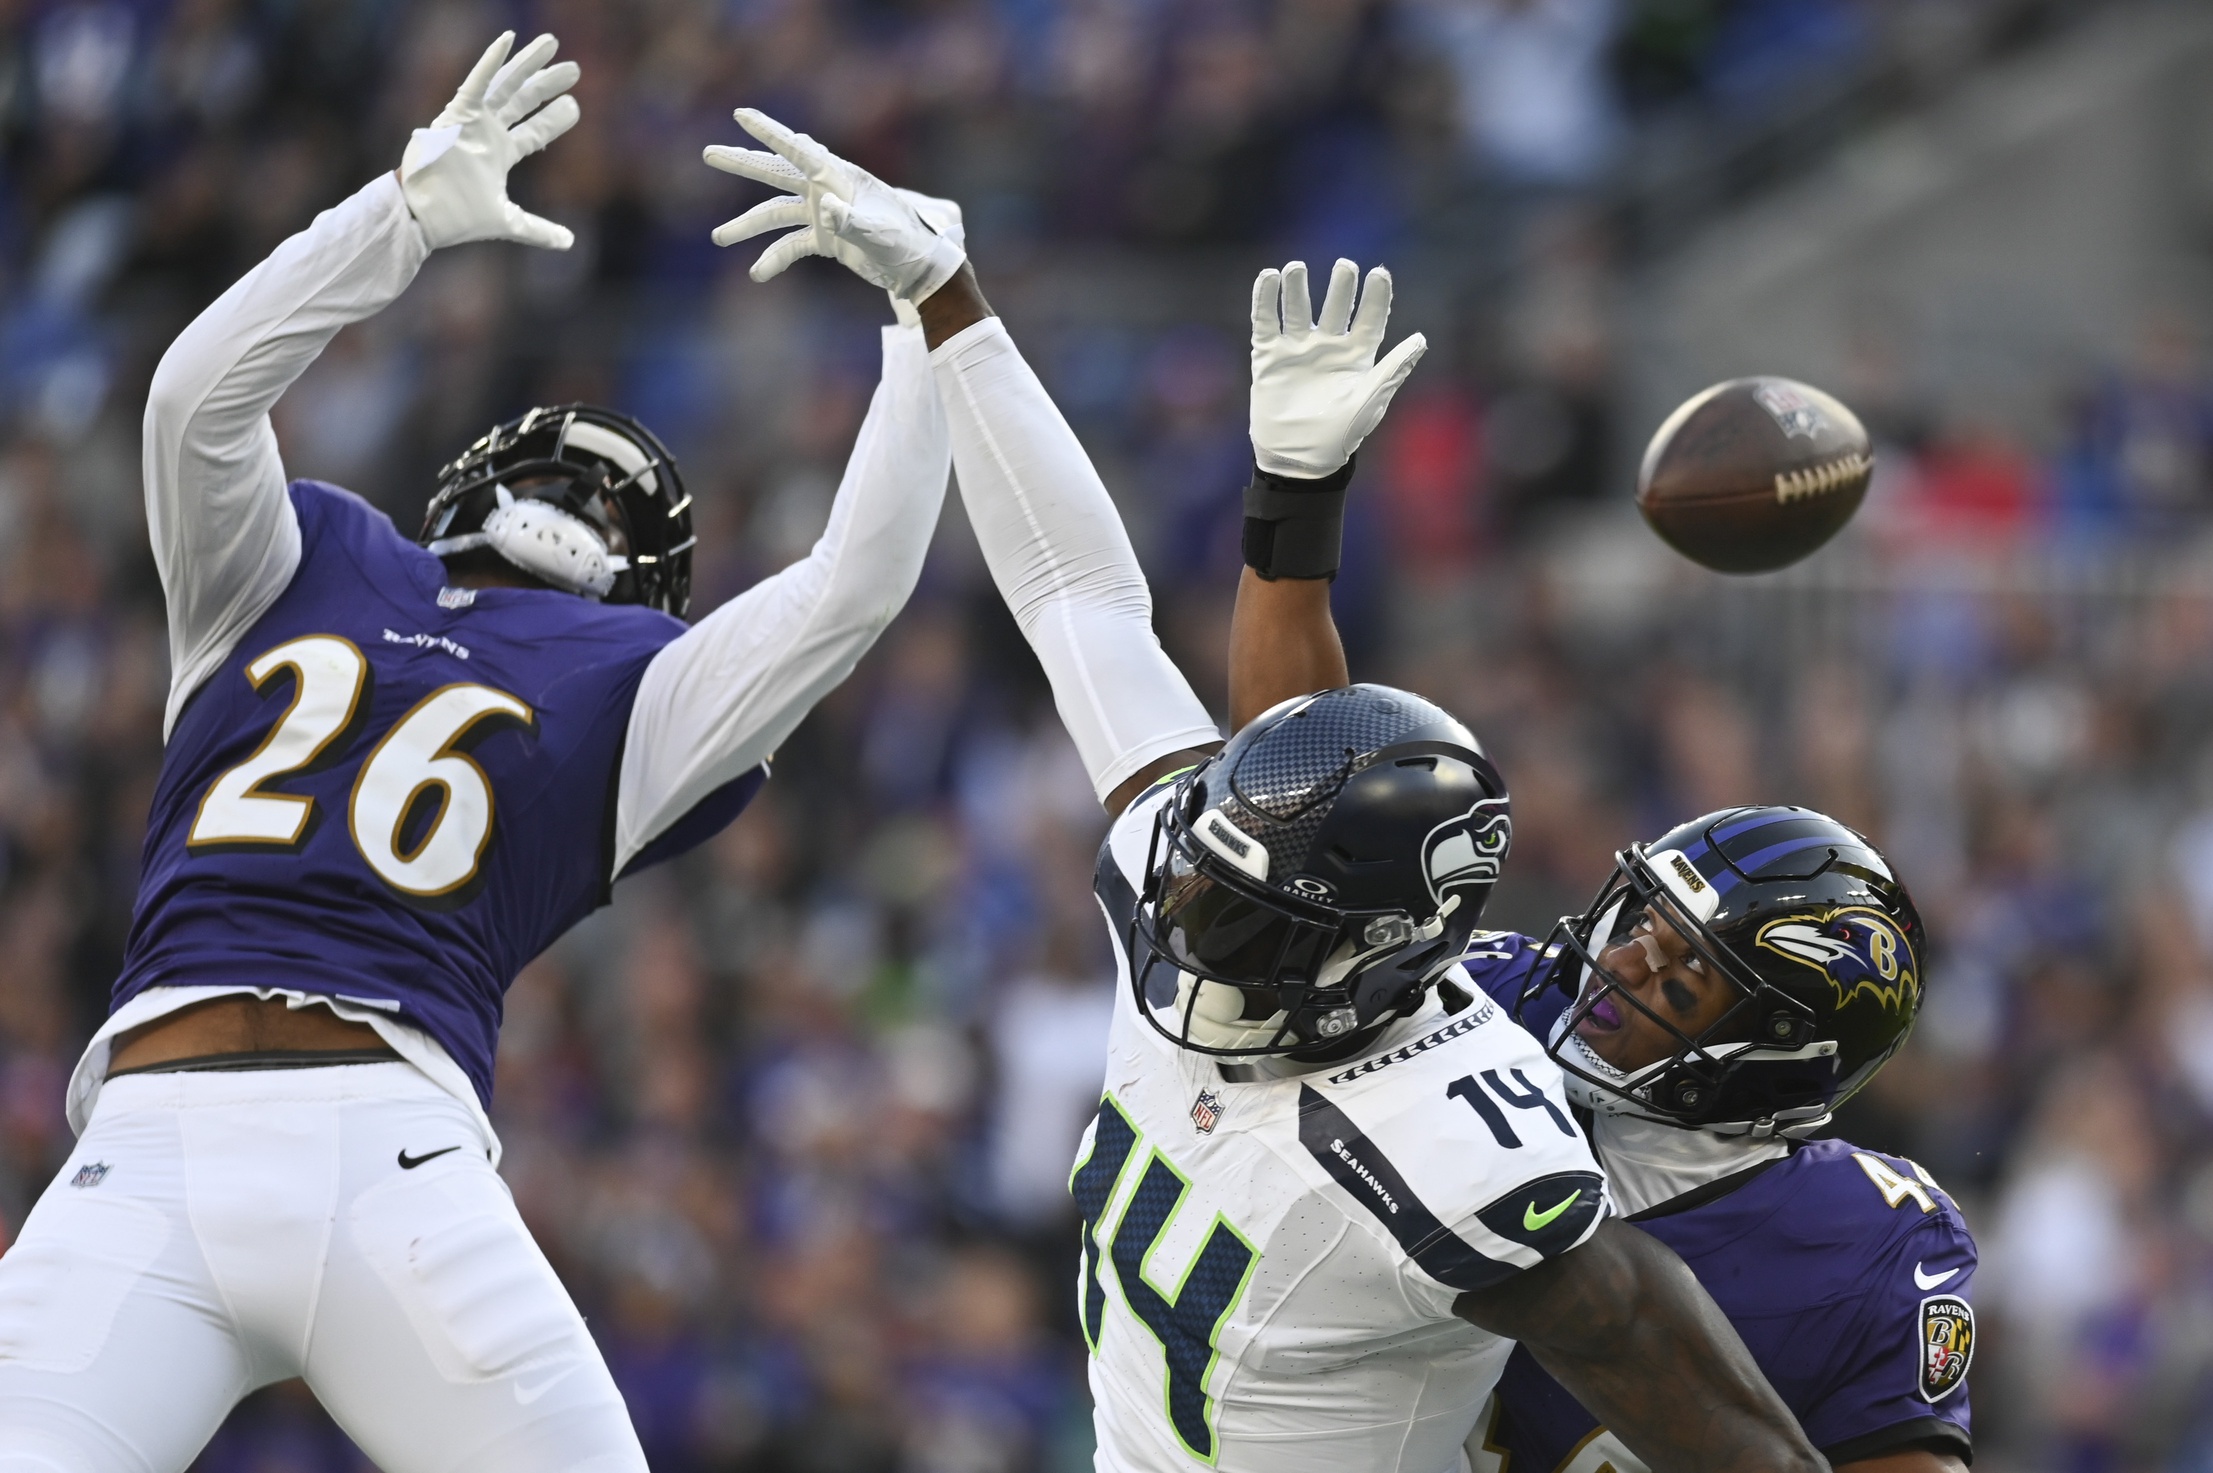 Nov 5, 2023; Baltimore, Maryland, USA; Baltimore Ravens safety Geno Stone (26) and cornerback Marlon Humphrey (44) break up a pass intended for Seattle Seahawks wide receiver DK Metcalf (14) in the end zone during the second half at M&T Bank Stadium. Mandatory Credit: Tommy Gilligan-USA TODAY Sports